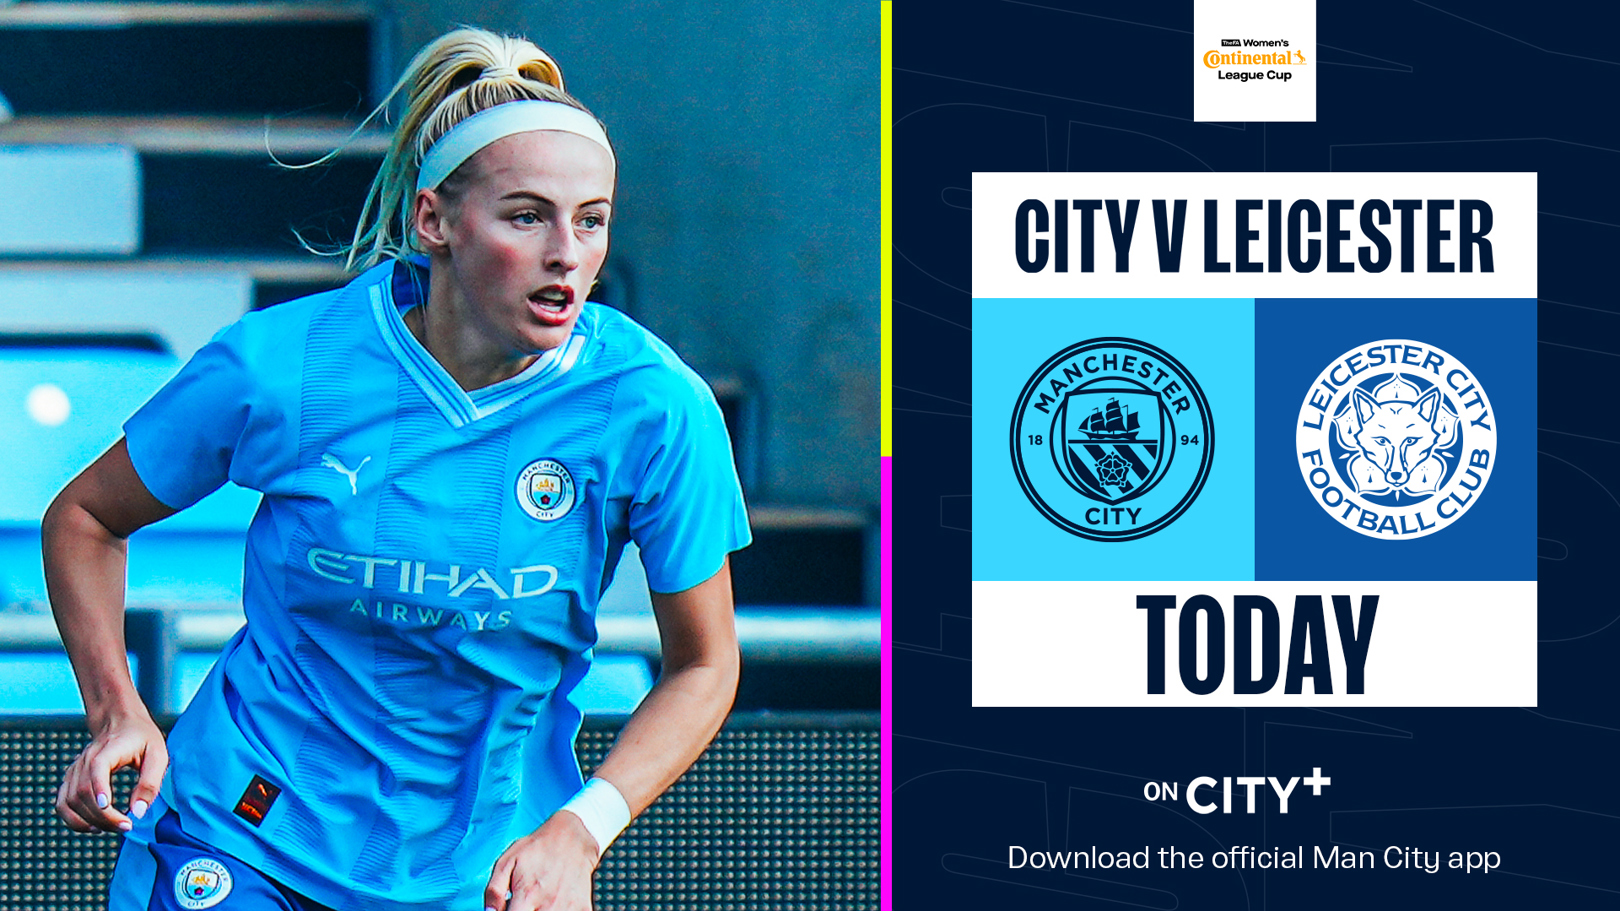 City v Leicester: Watch our derby heroes live on CITY+ today